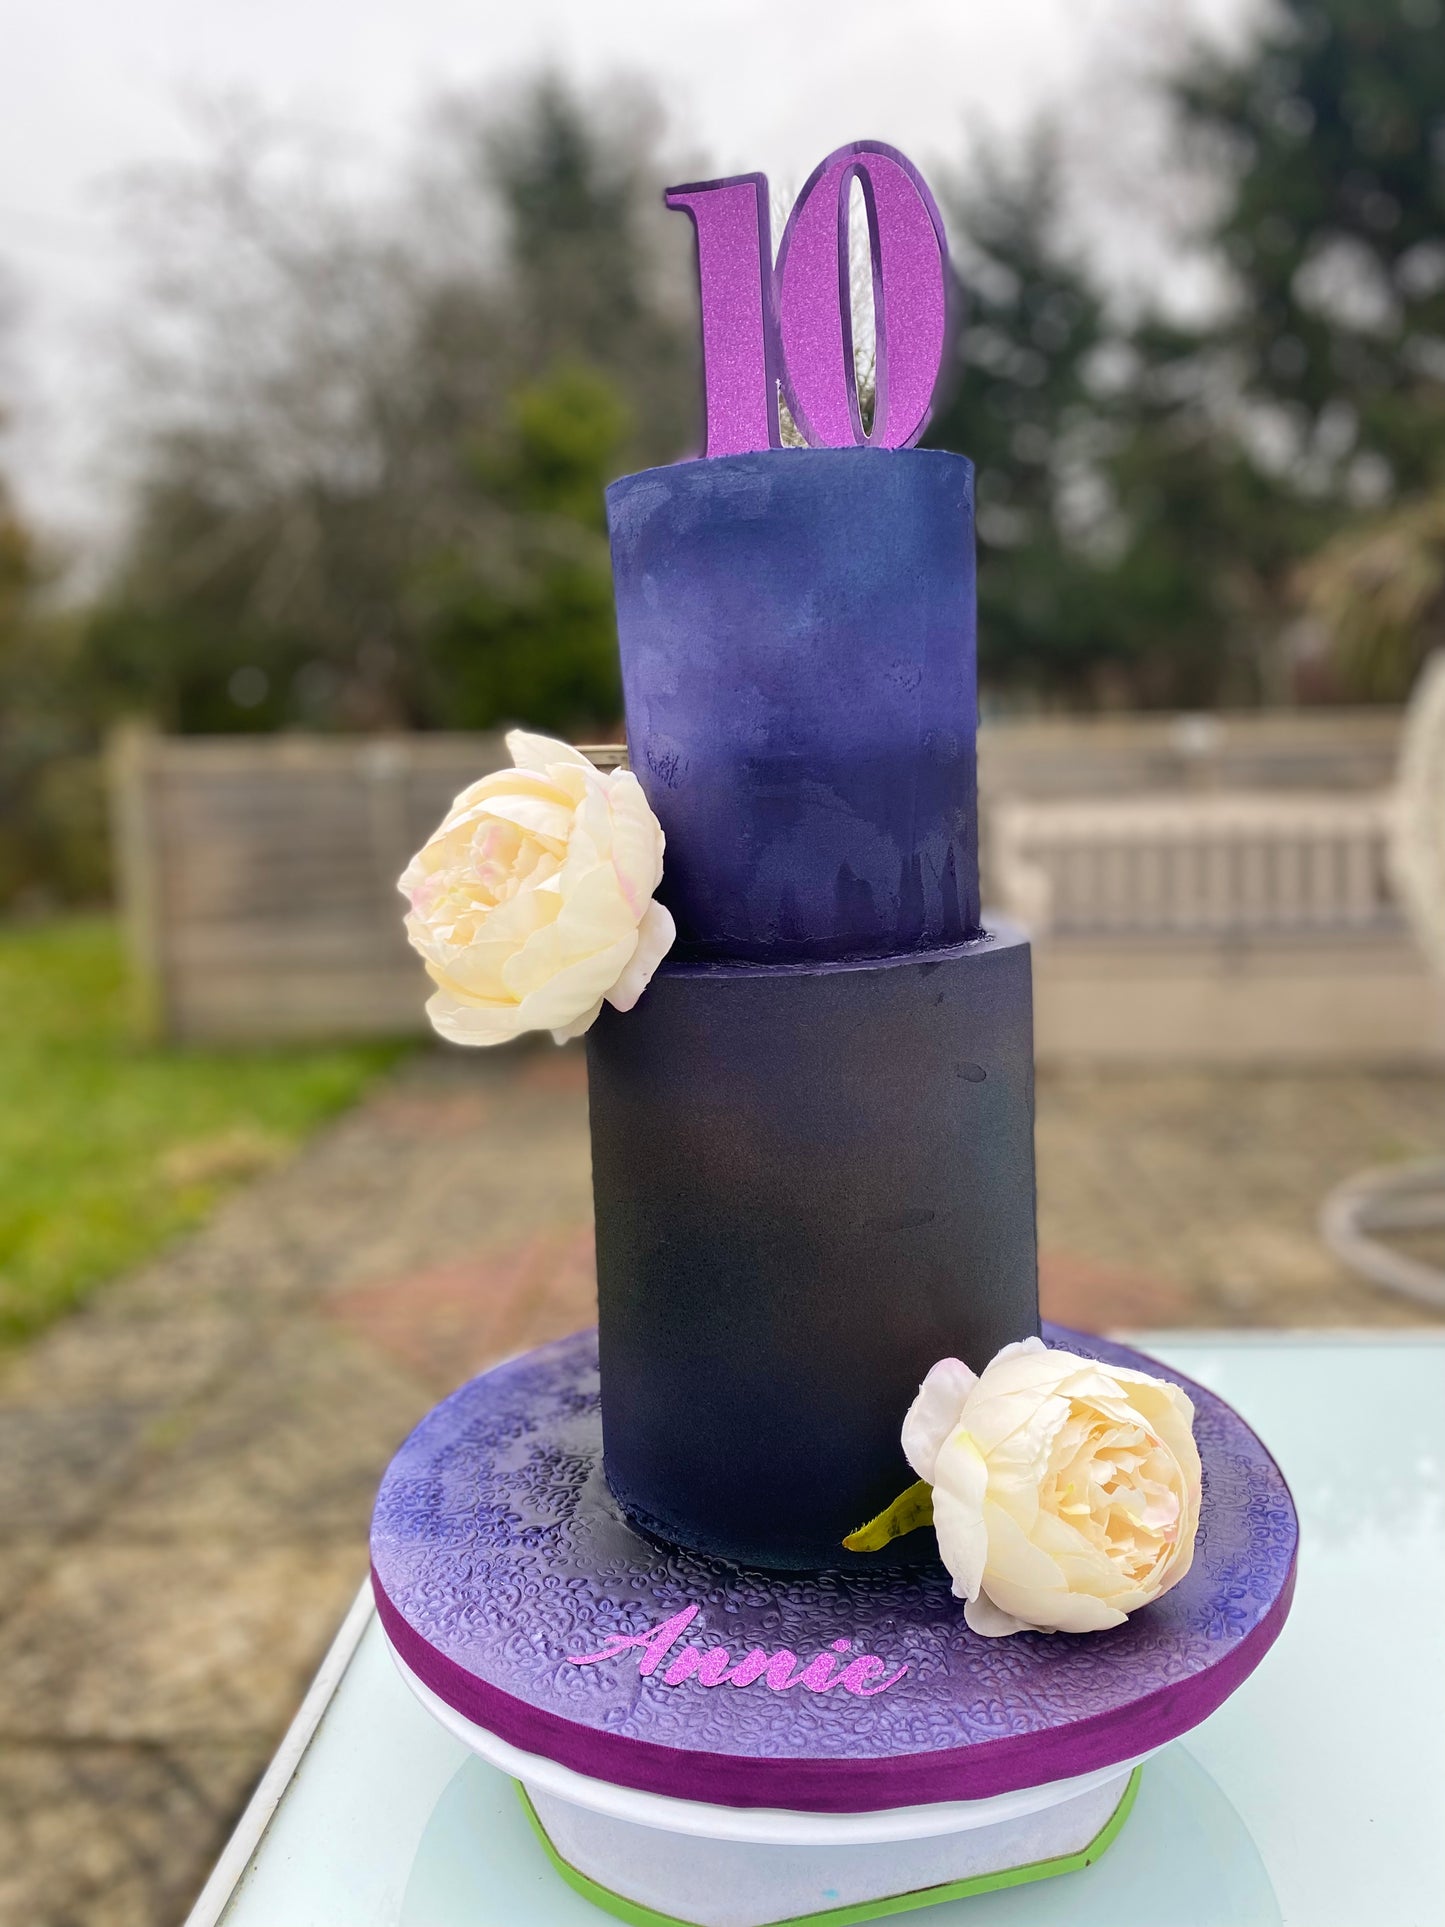 Black cake with purple accents